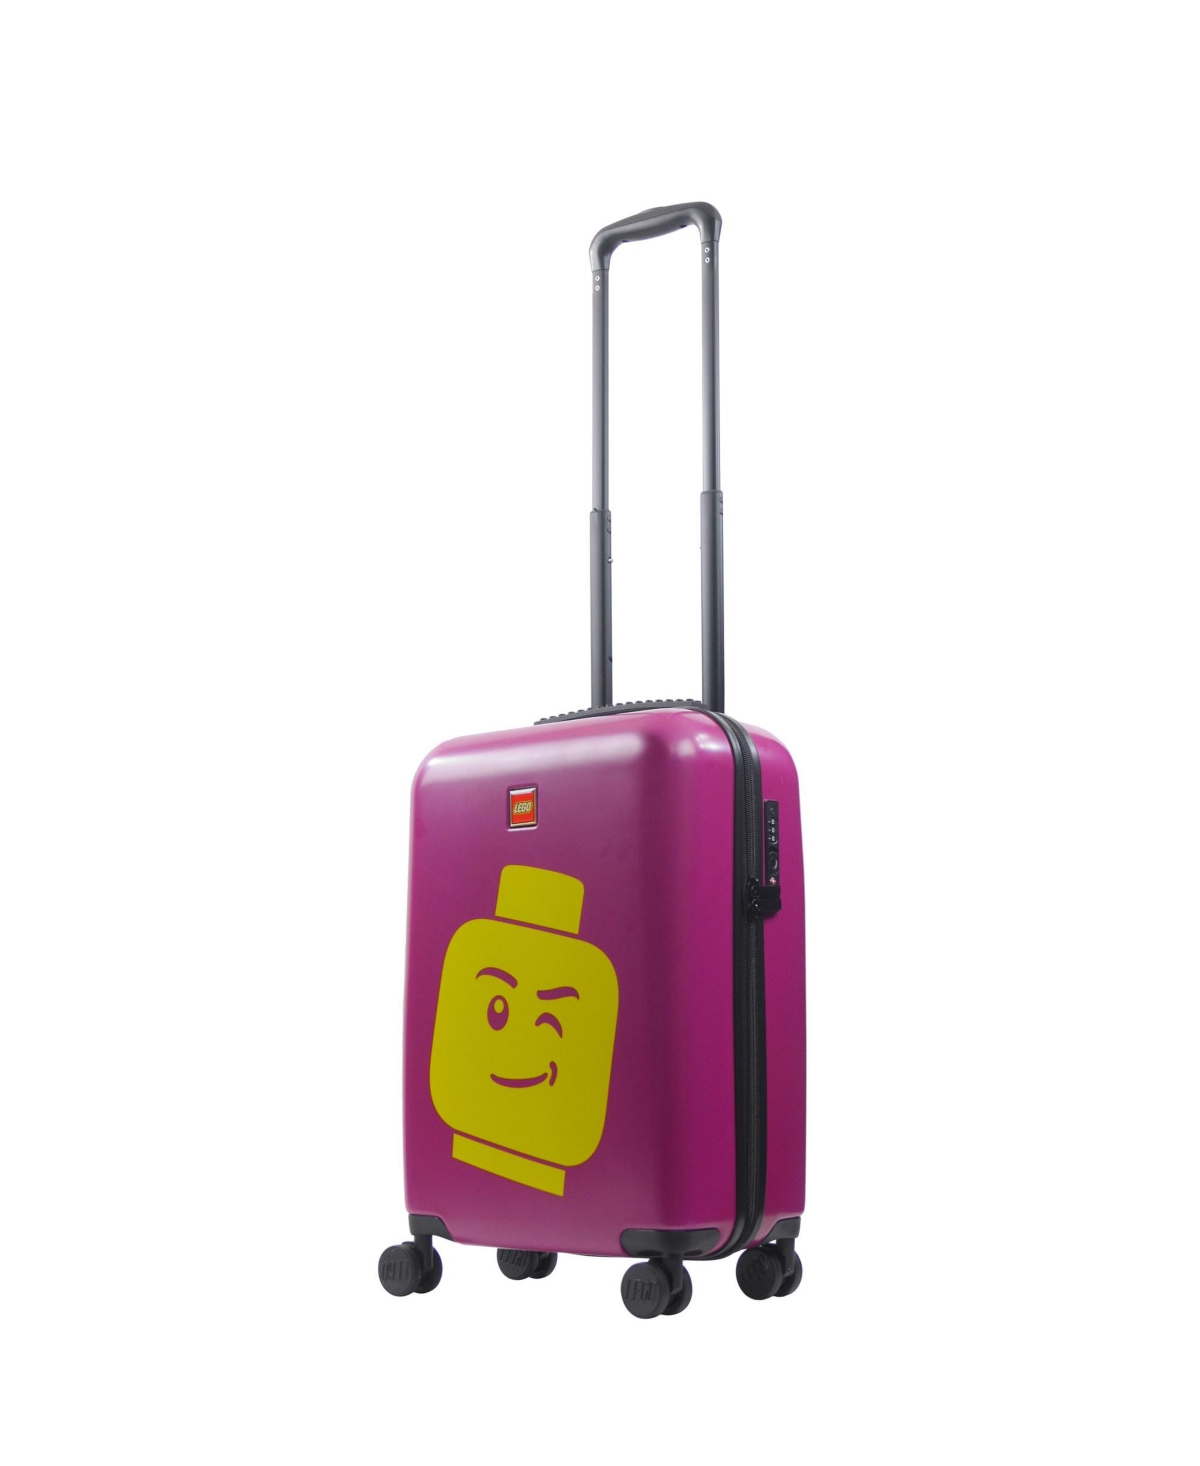 Lego Color Box Minifigure Head 23" Carry-on Luggage - Pink